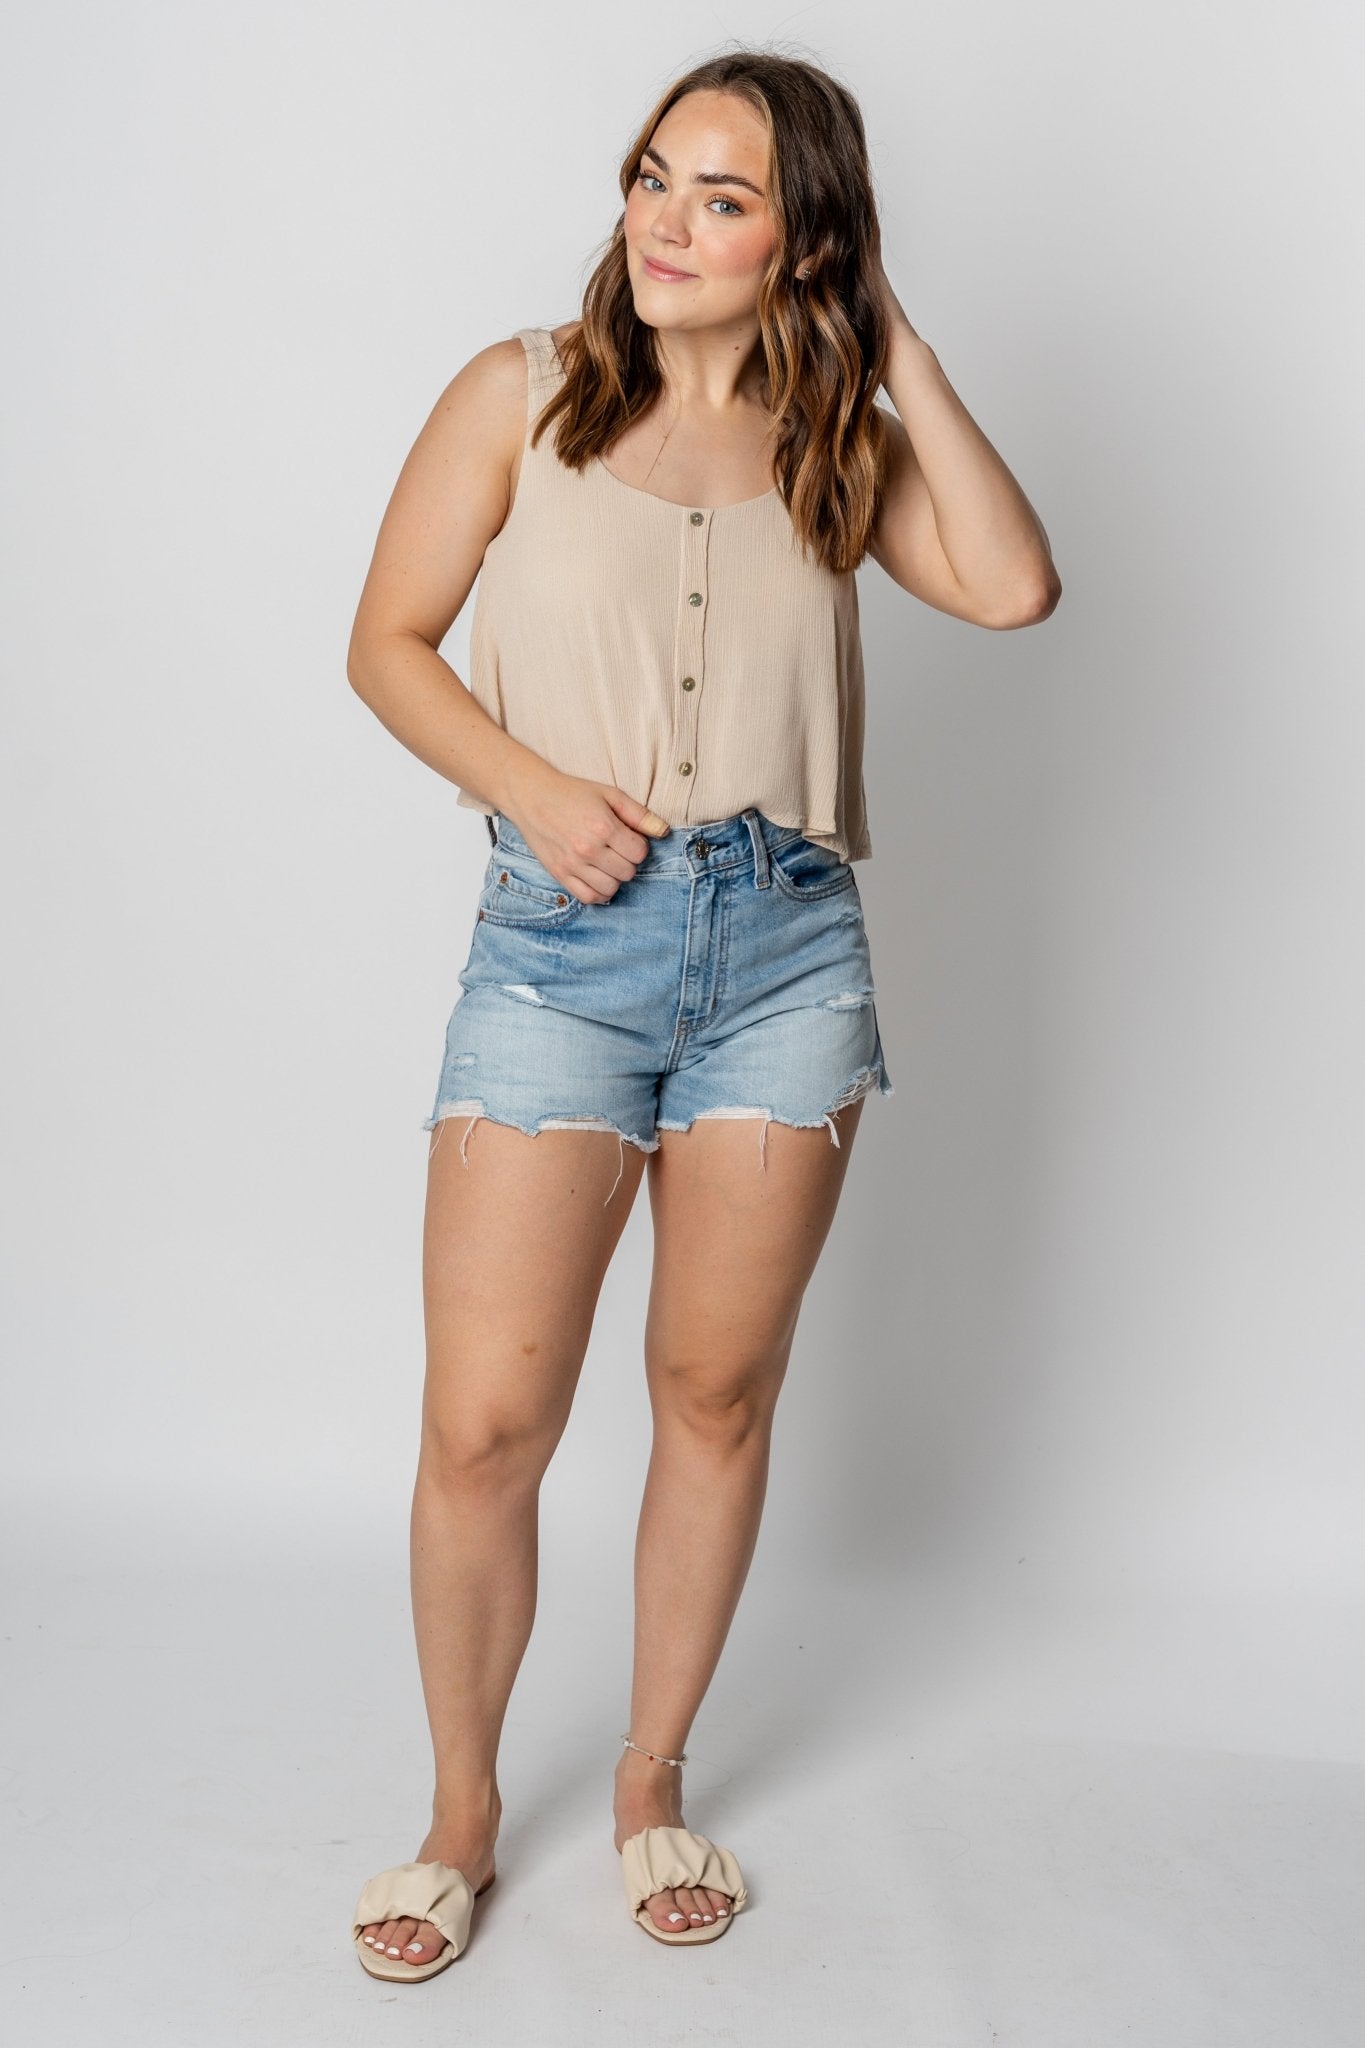 Cropped button tank top cream - Trendy Top - Fashion Tank Tops at Lush Fashion Lounge Boutique in Oklahoma City